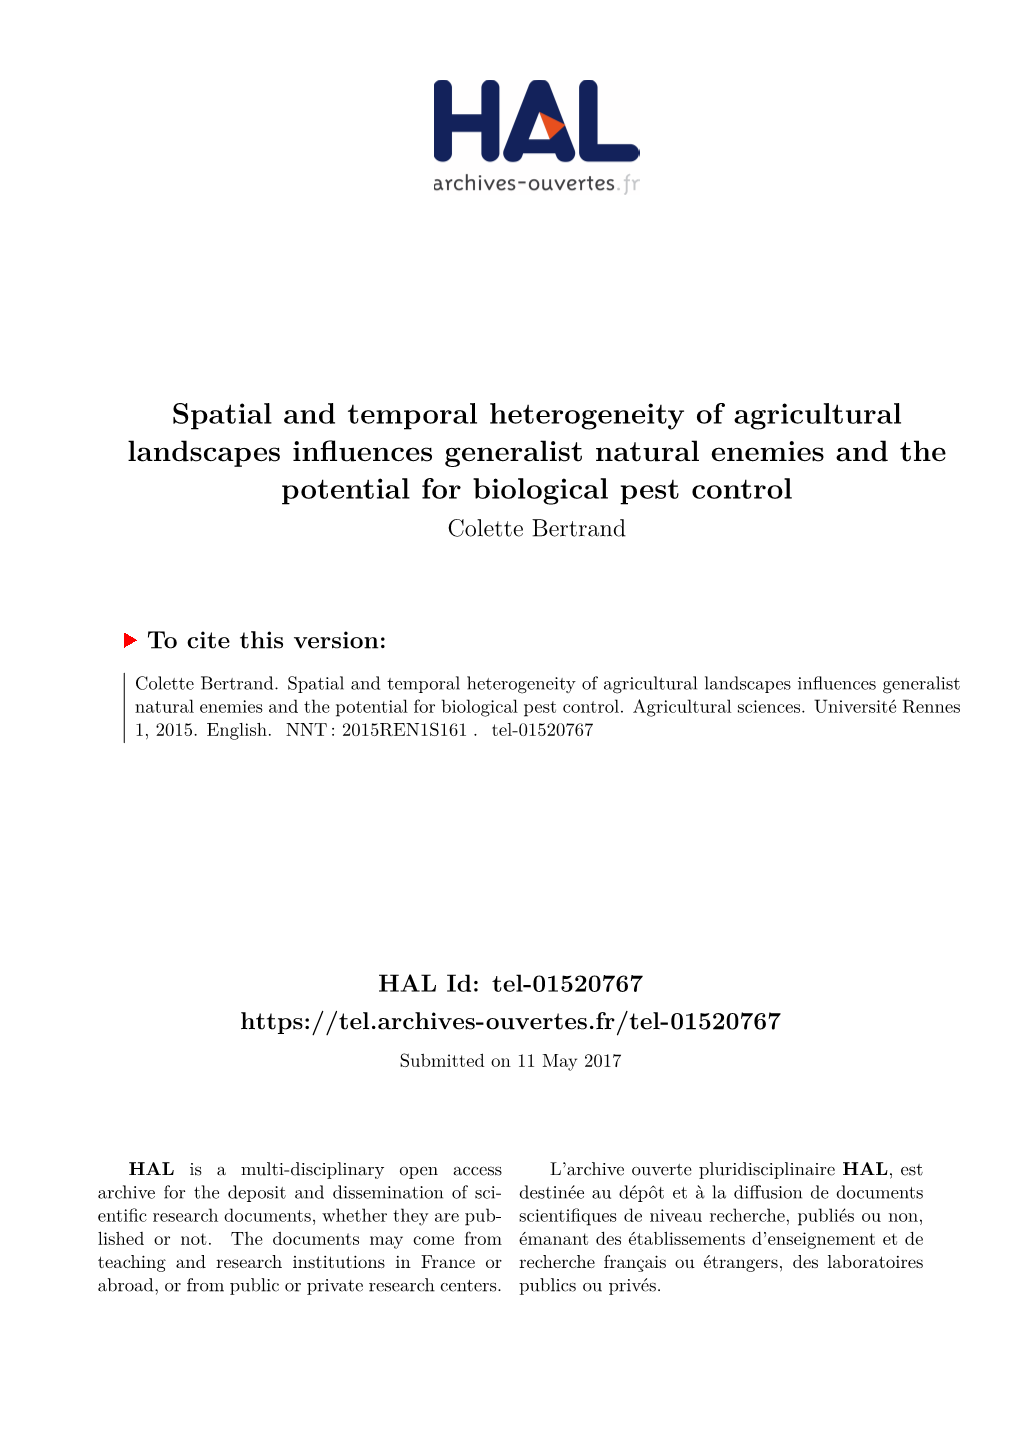 Spatial and Temporal Heterogeneity of Agricultural Landscapes Influences Generalist Natural Enemies and the Potential for Biological Pest Control Colette Bertrand